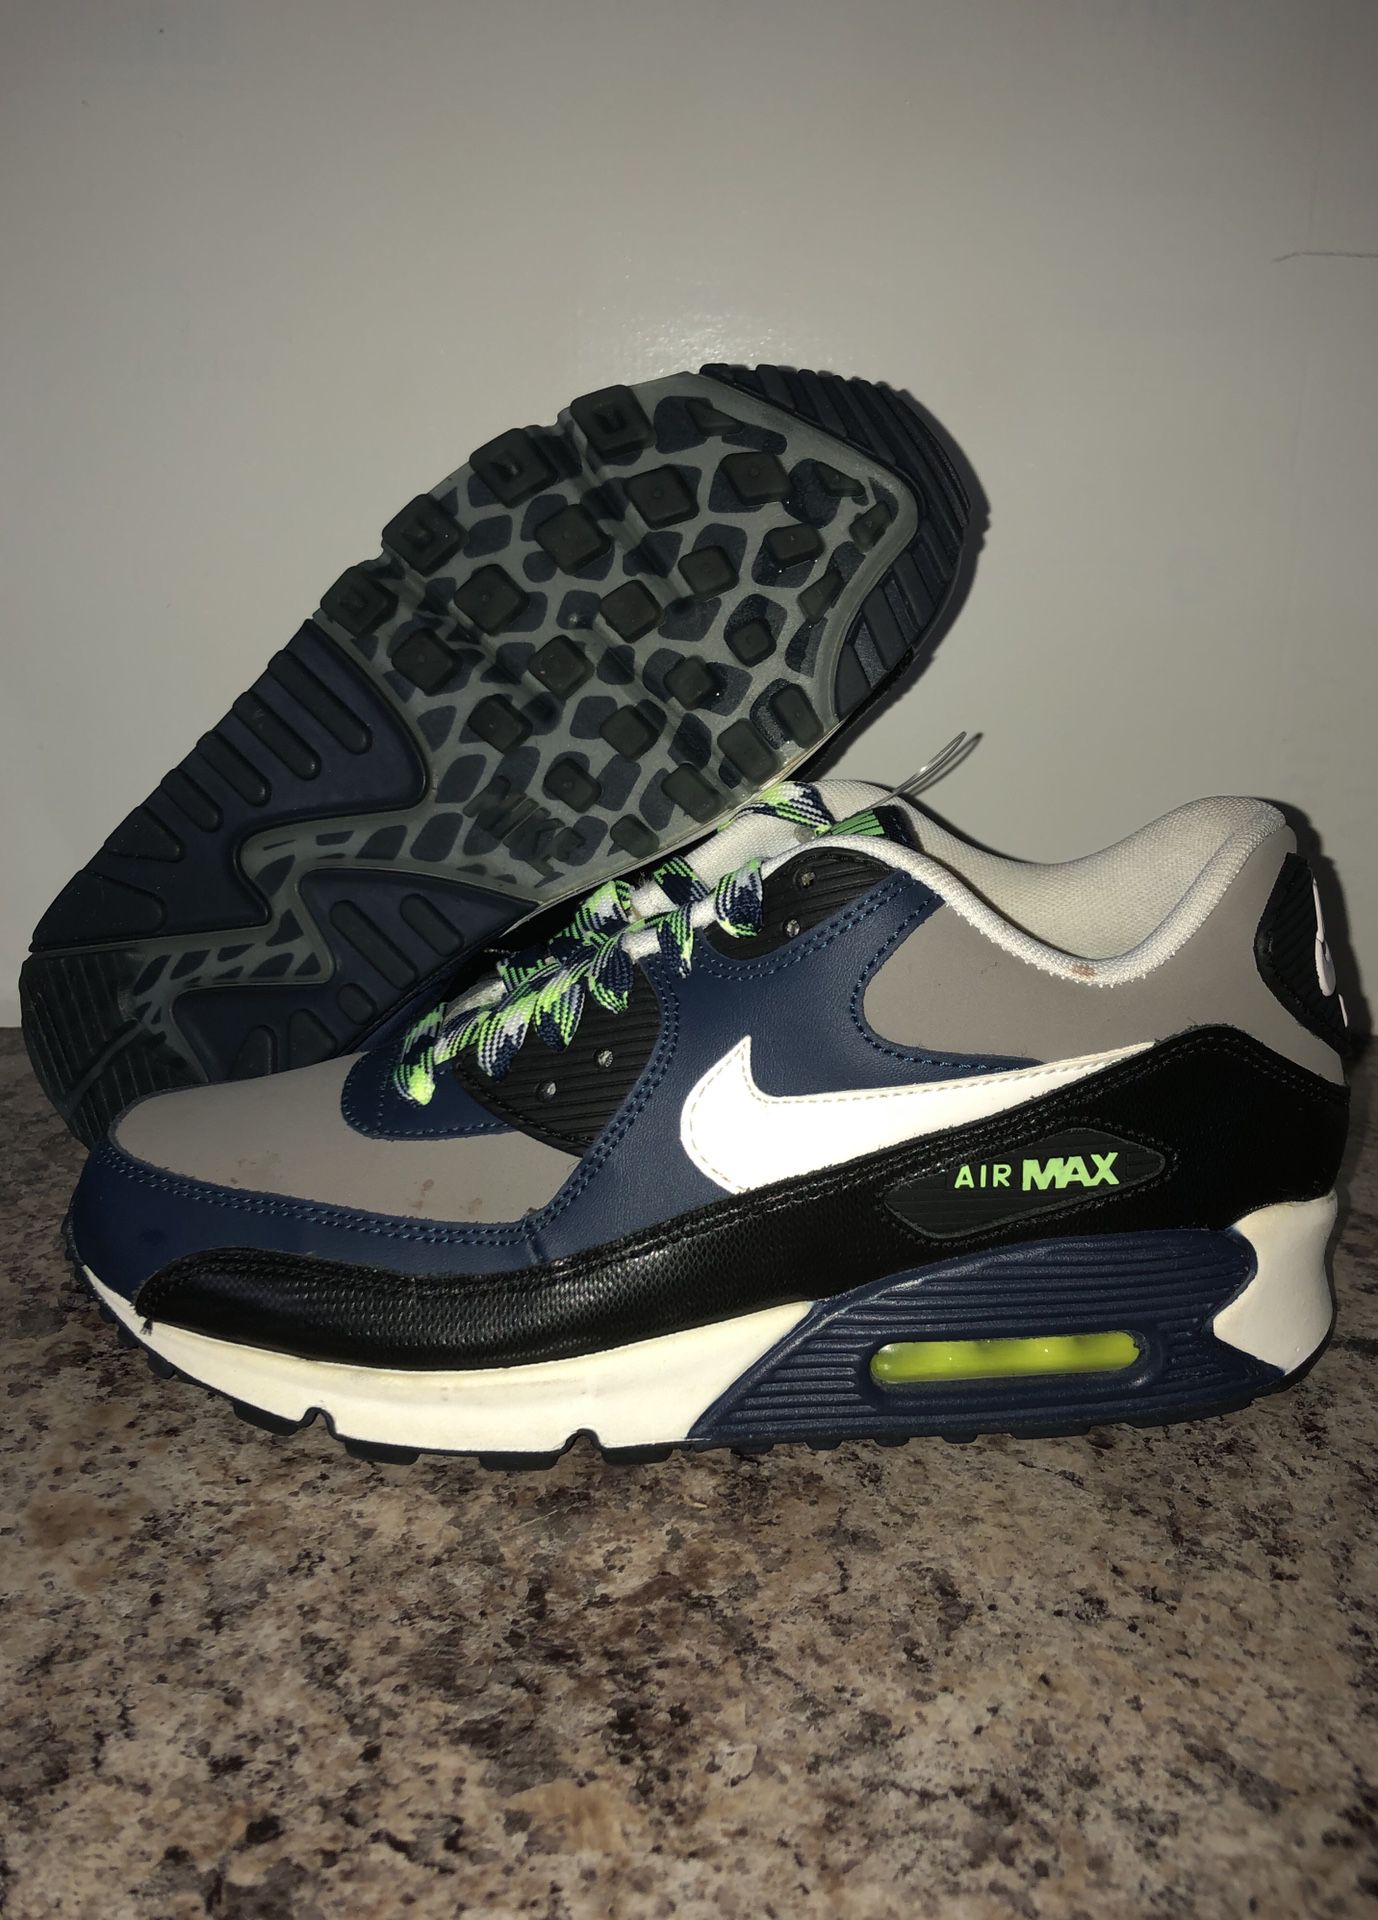 Nike Air Max 90 LAX 2012 Lacrosse Shoes Size 6